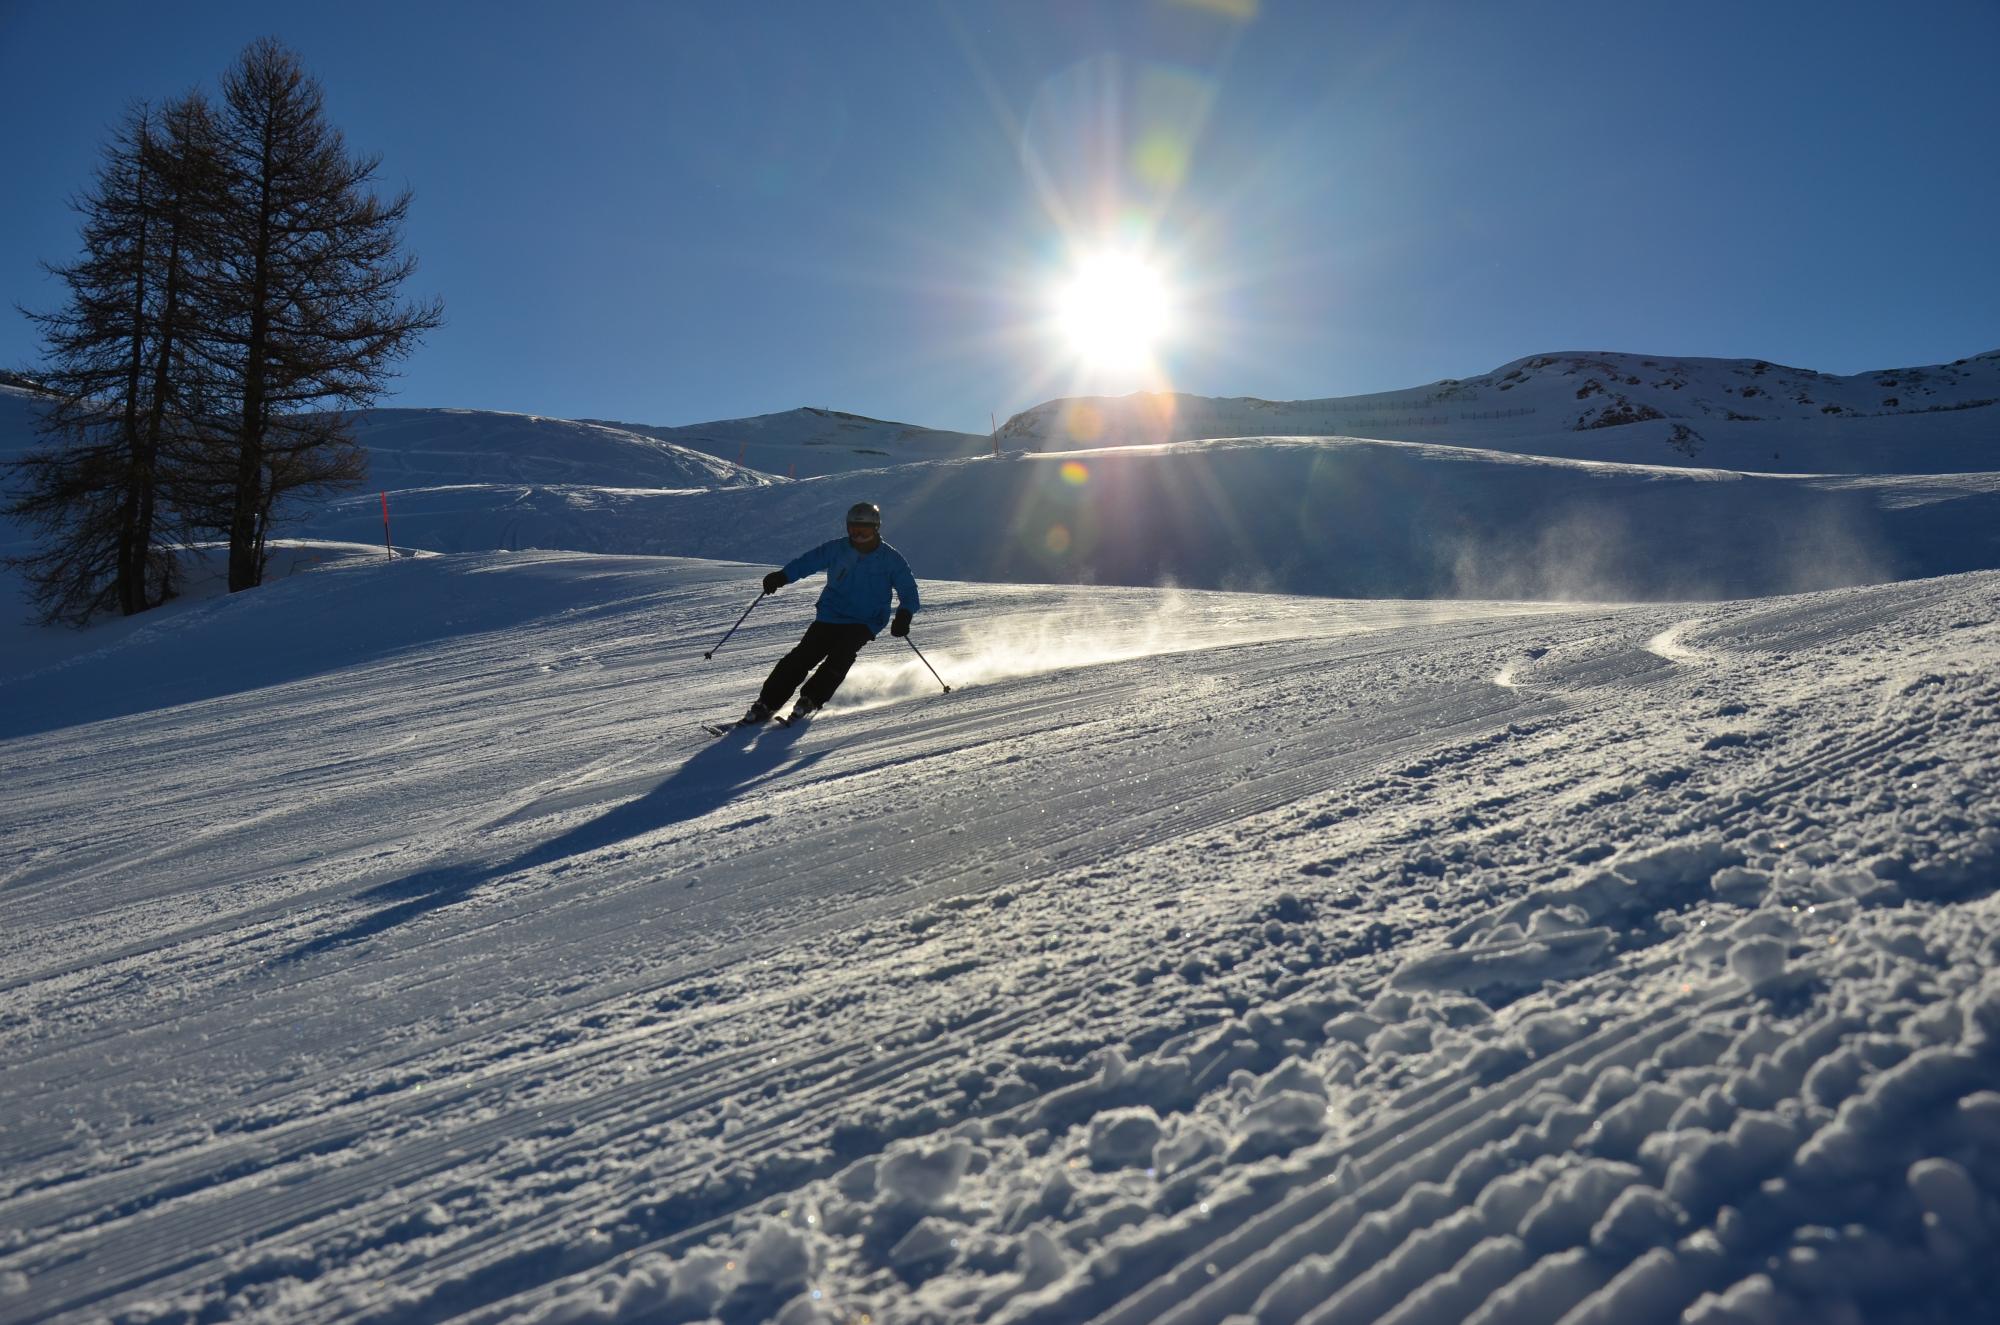 Late afternoon skiing with Ski Club of Ireland group holiday